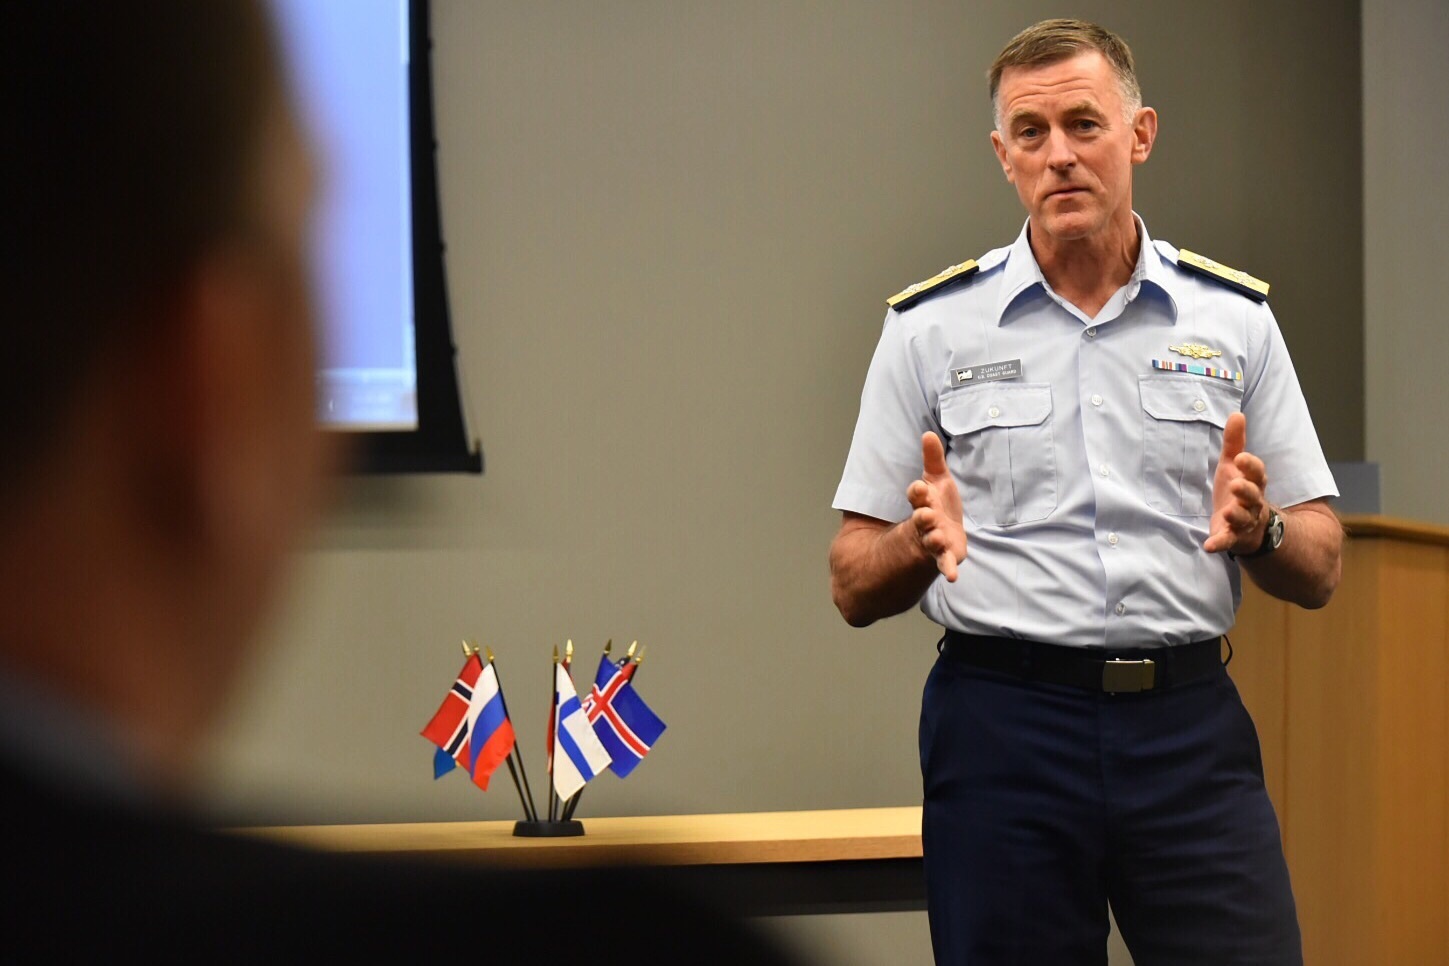 U.S. Coast Guard Commandant Adm. Paul Zukunft speaks during the Arctic Coast Guard Forum (ACGF), a cooperative initiative between nations with shared maritime interests in the Arctic, at U.S. Coast Guard Headquarters in Washington, March 25, 2015. (Petty Officer 2nd Class Patrick Kelley/U.S. Coast Guard)